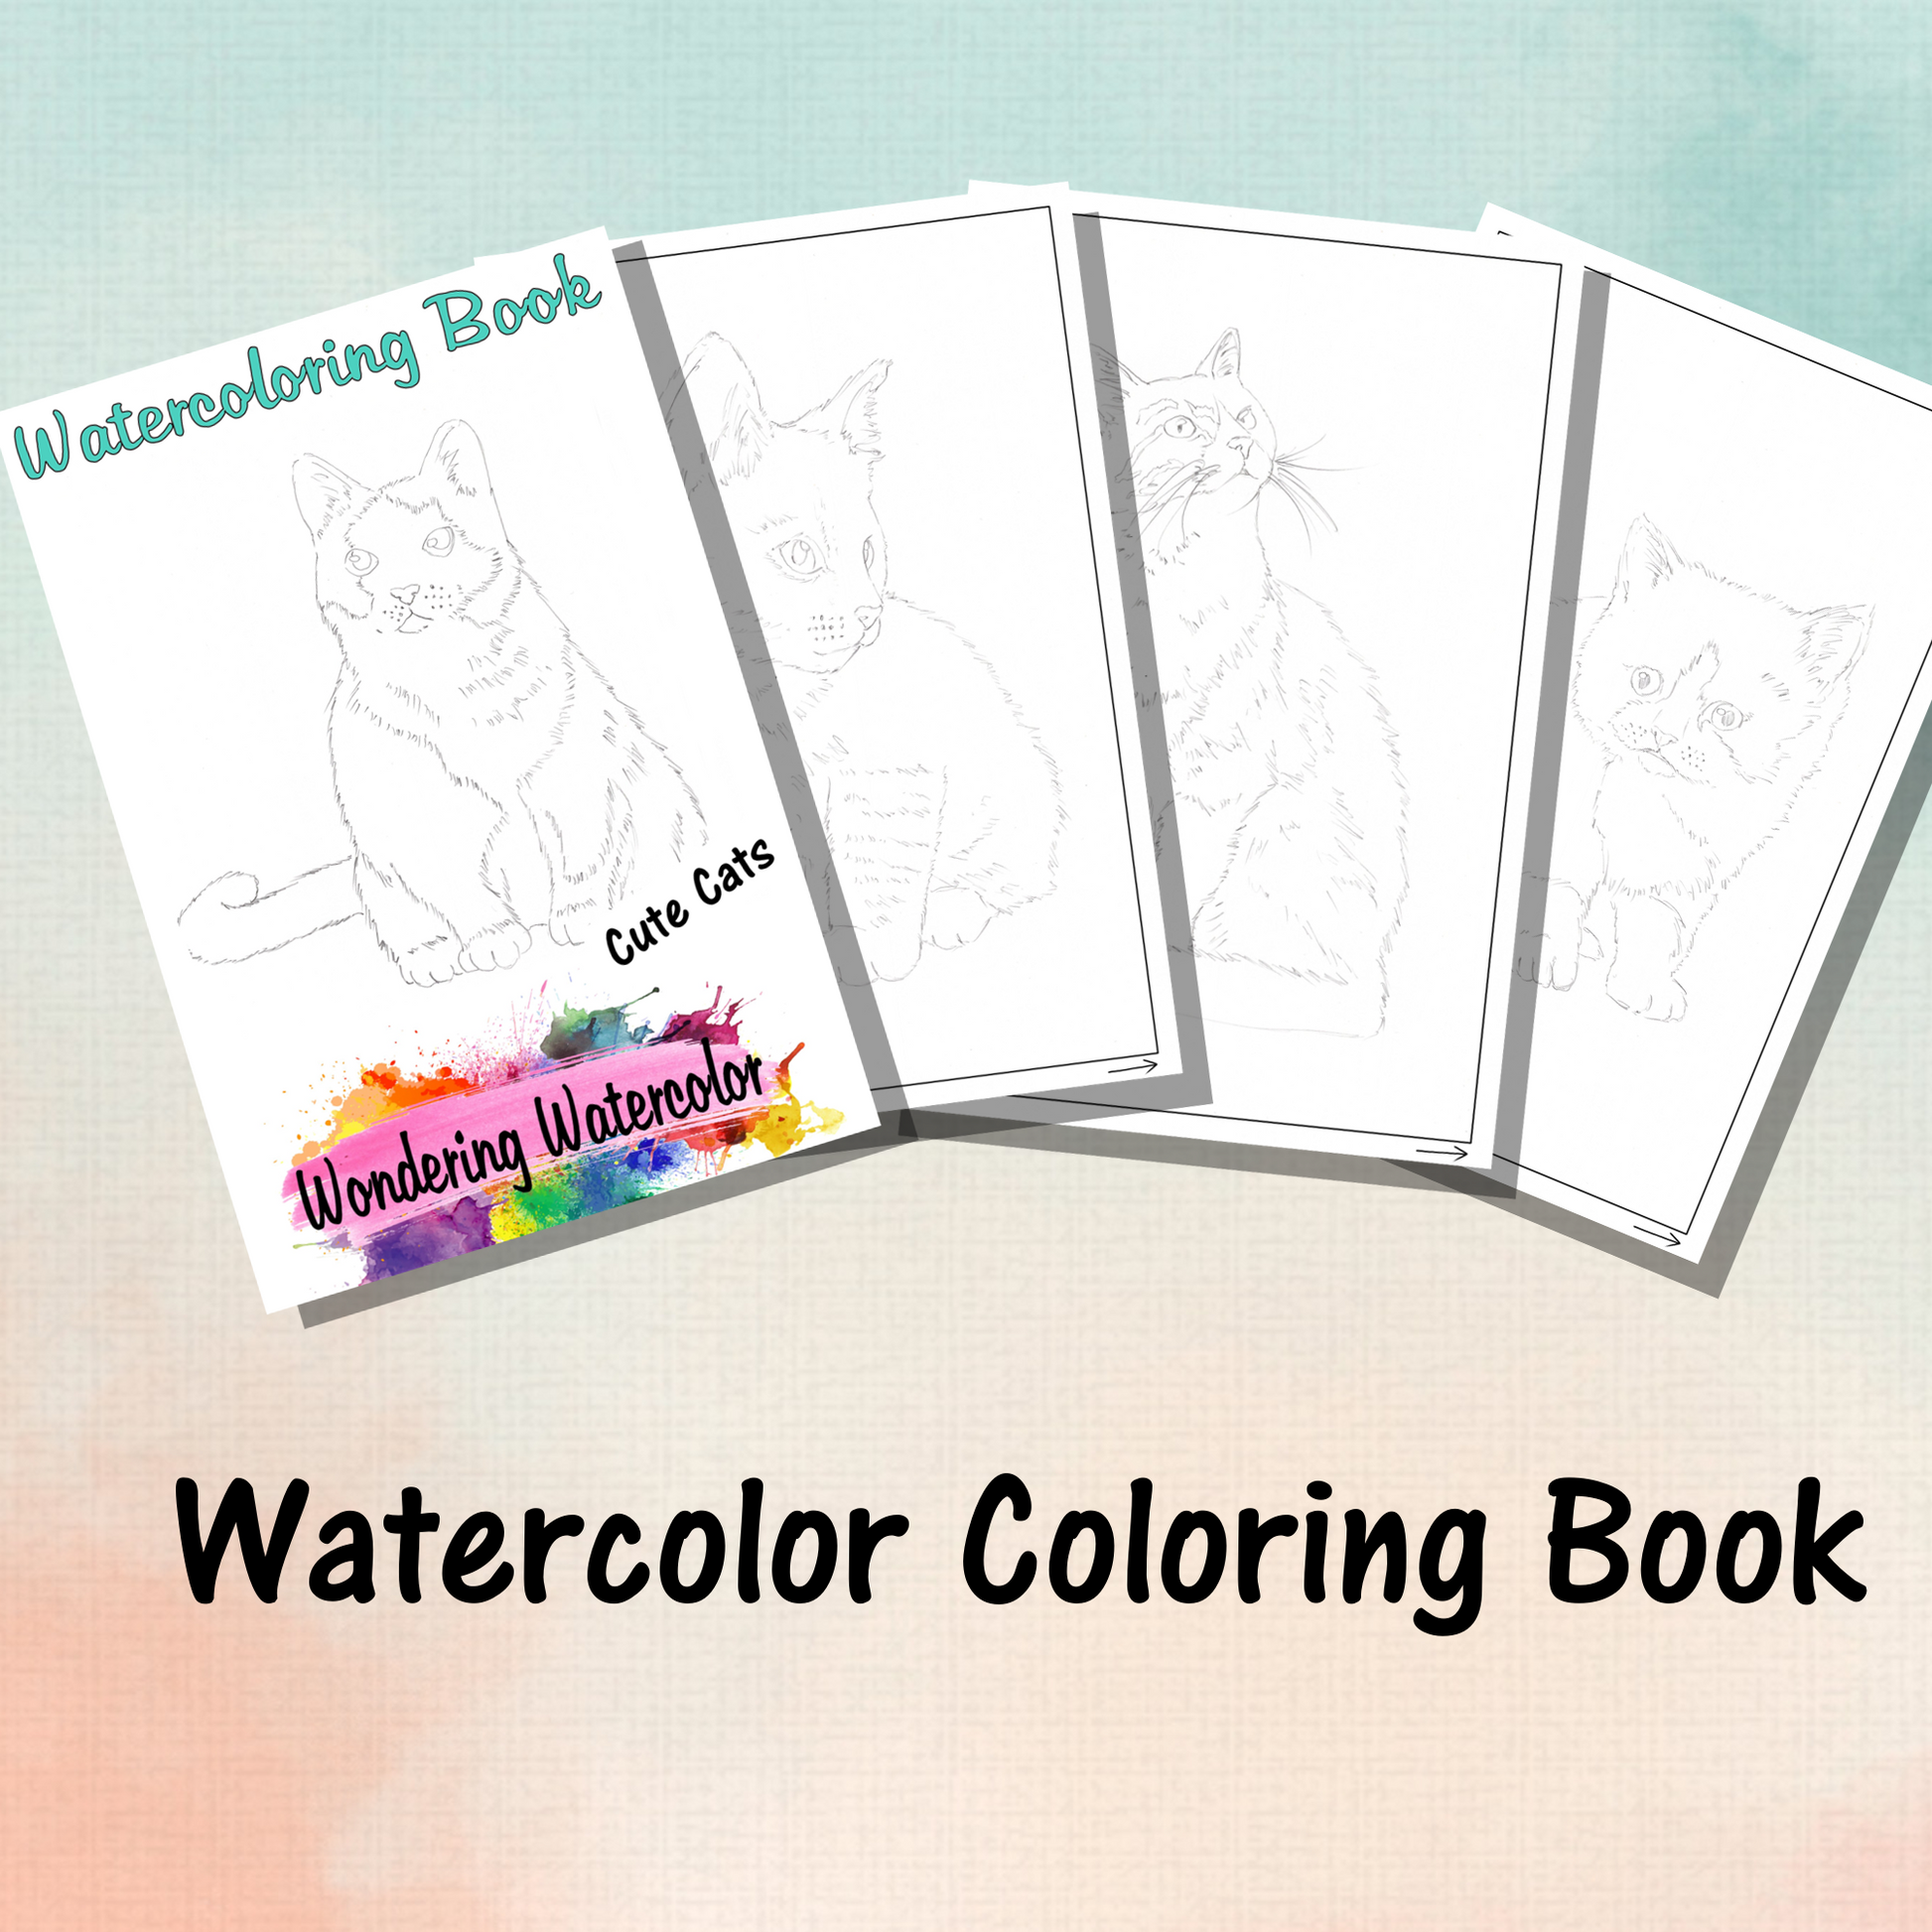 Date Night Couple's activity watercolor coloring book